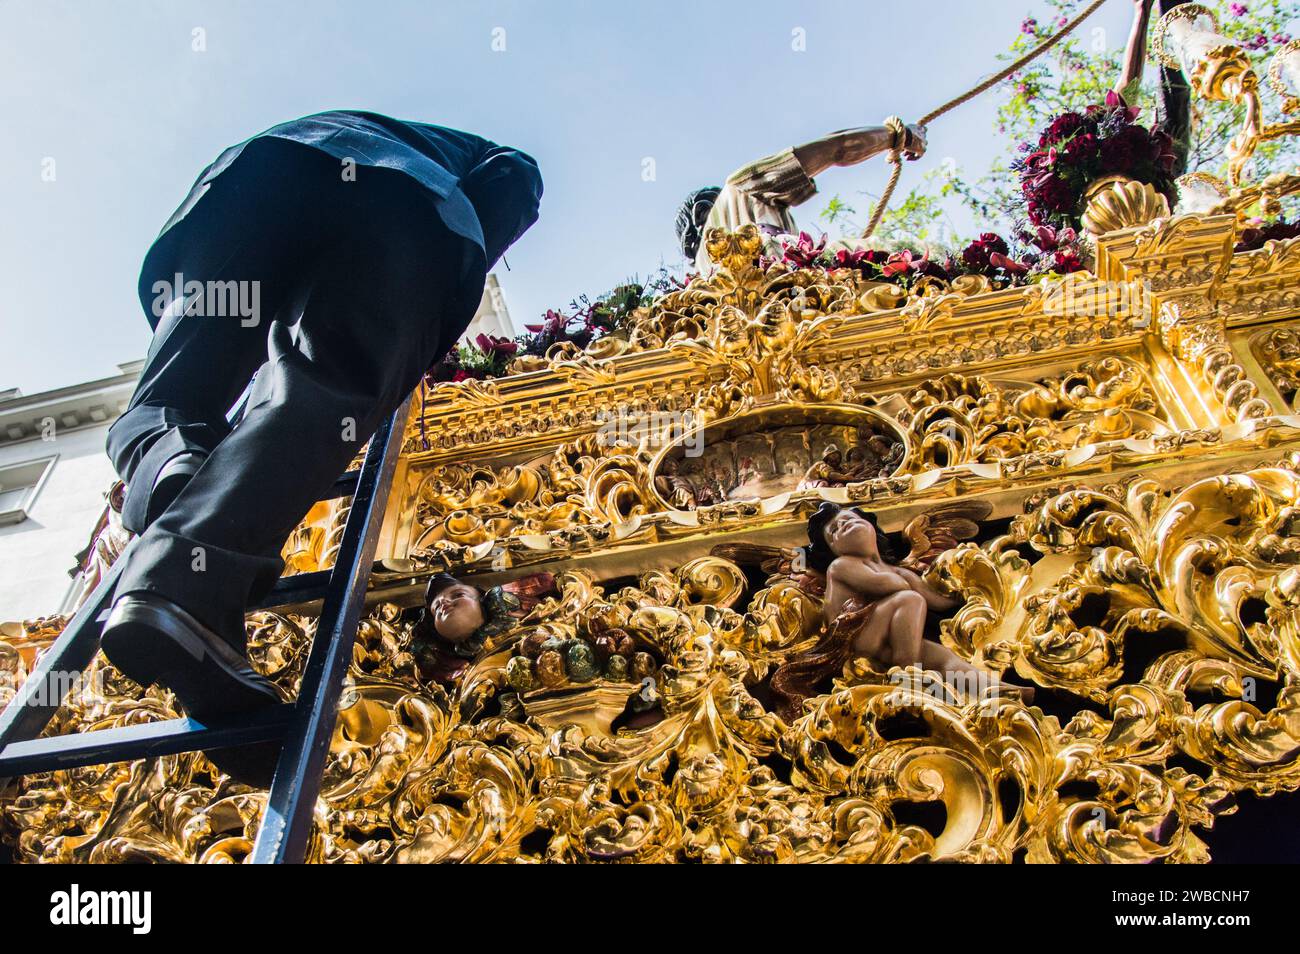 Devotee ascends a ladder on the ornate procession float in Seville, adorned with intricately carved wooden leaves and shimmering gold leaf. Stock Photo